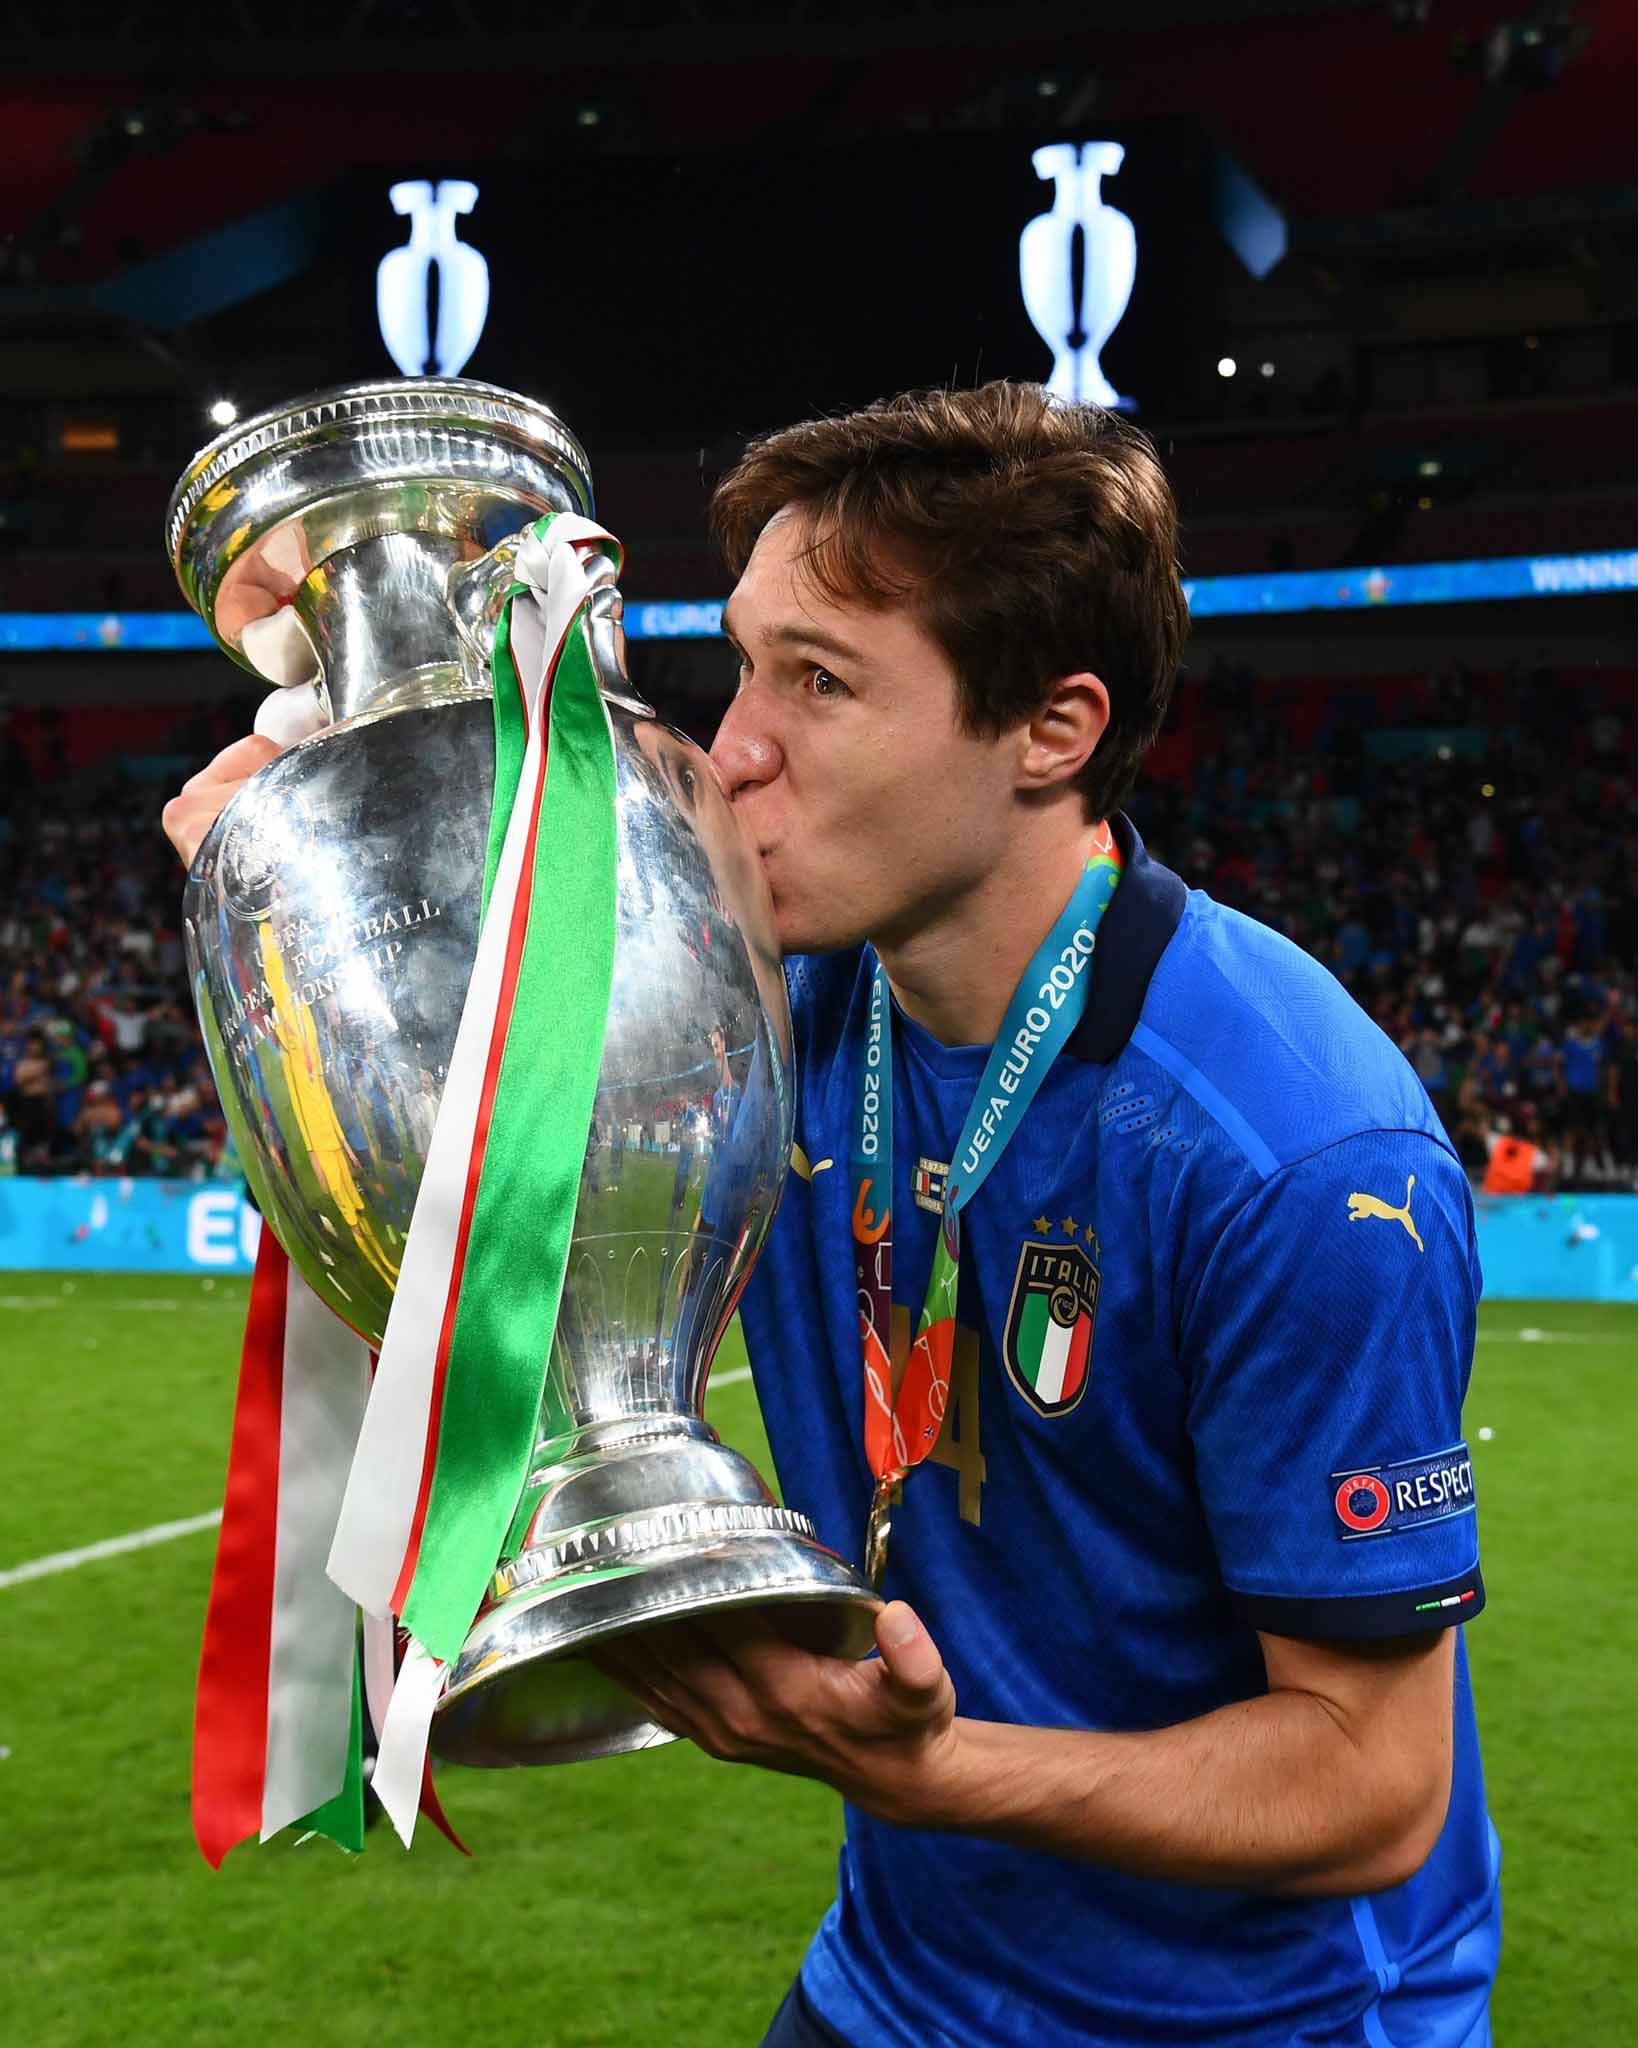 Federico Chiesa with Euro 2020 trophy